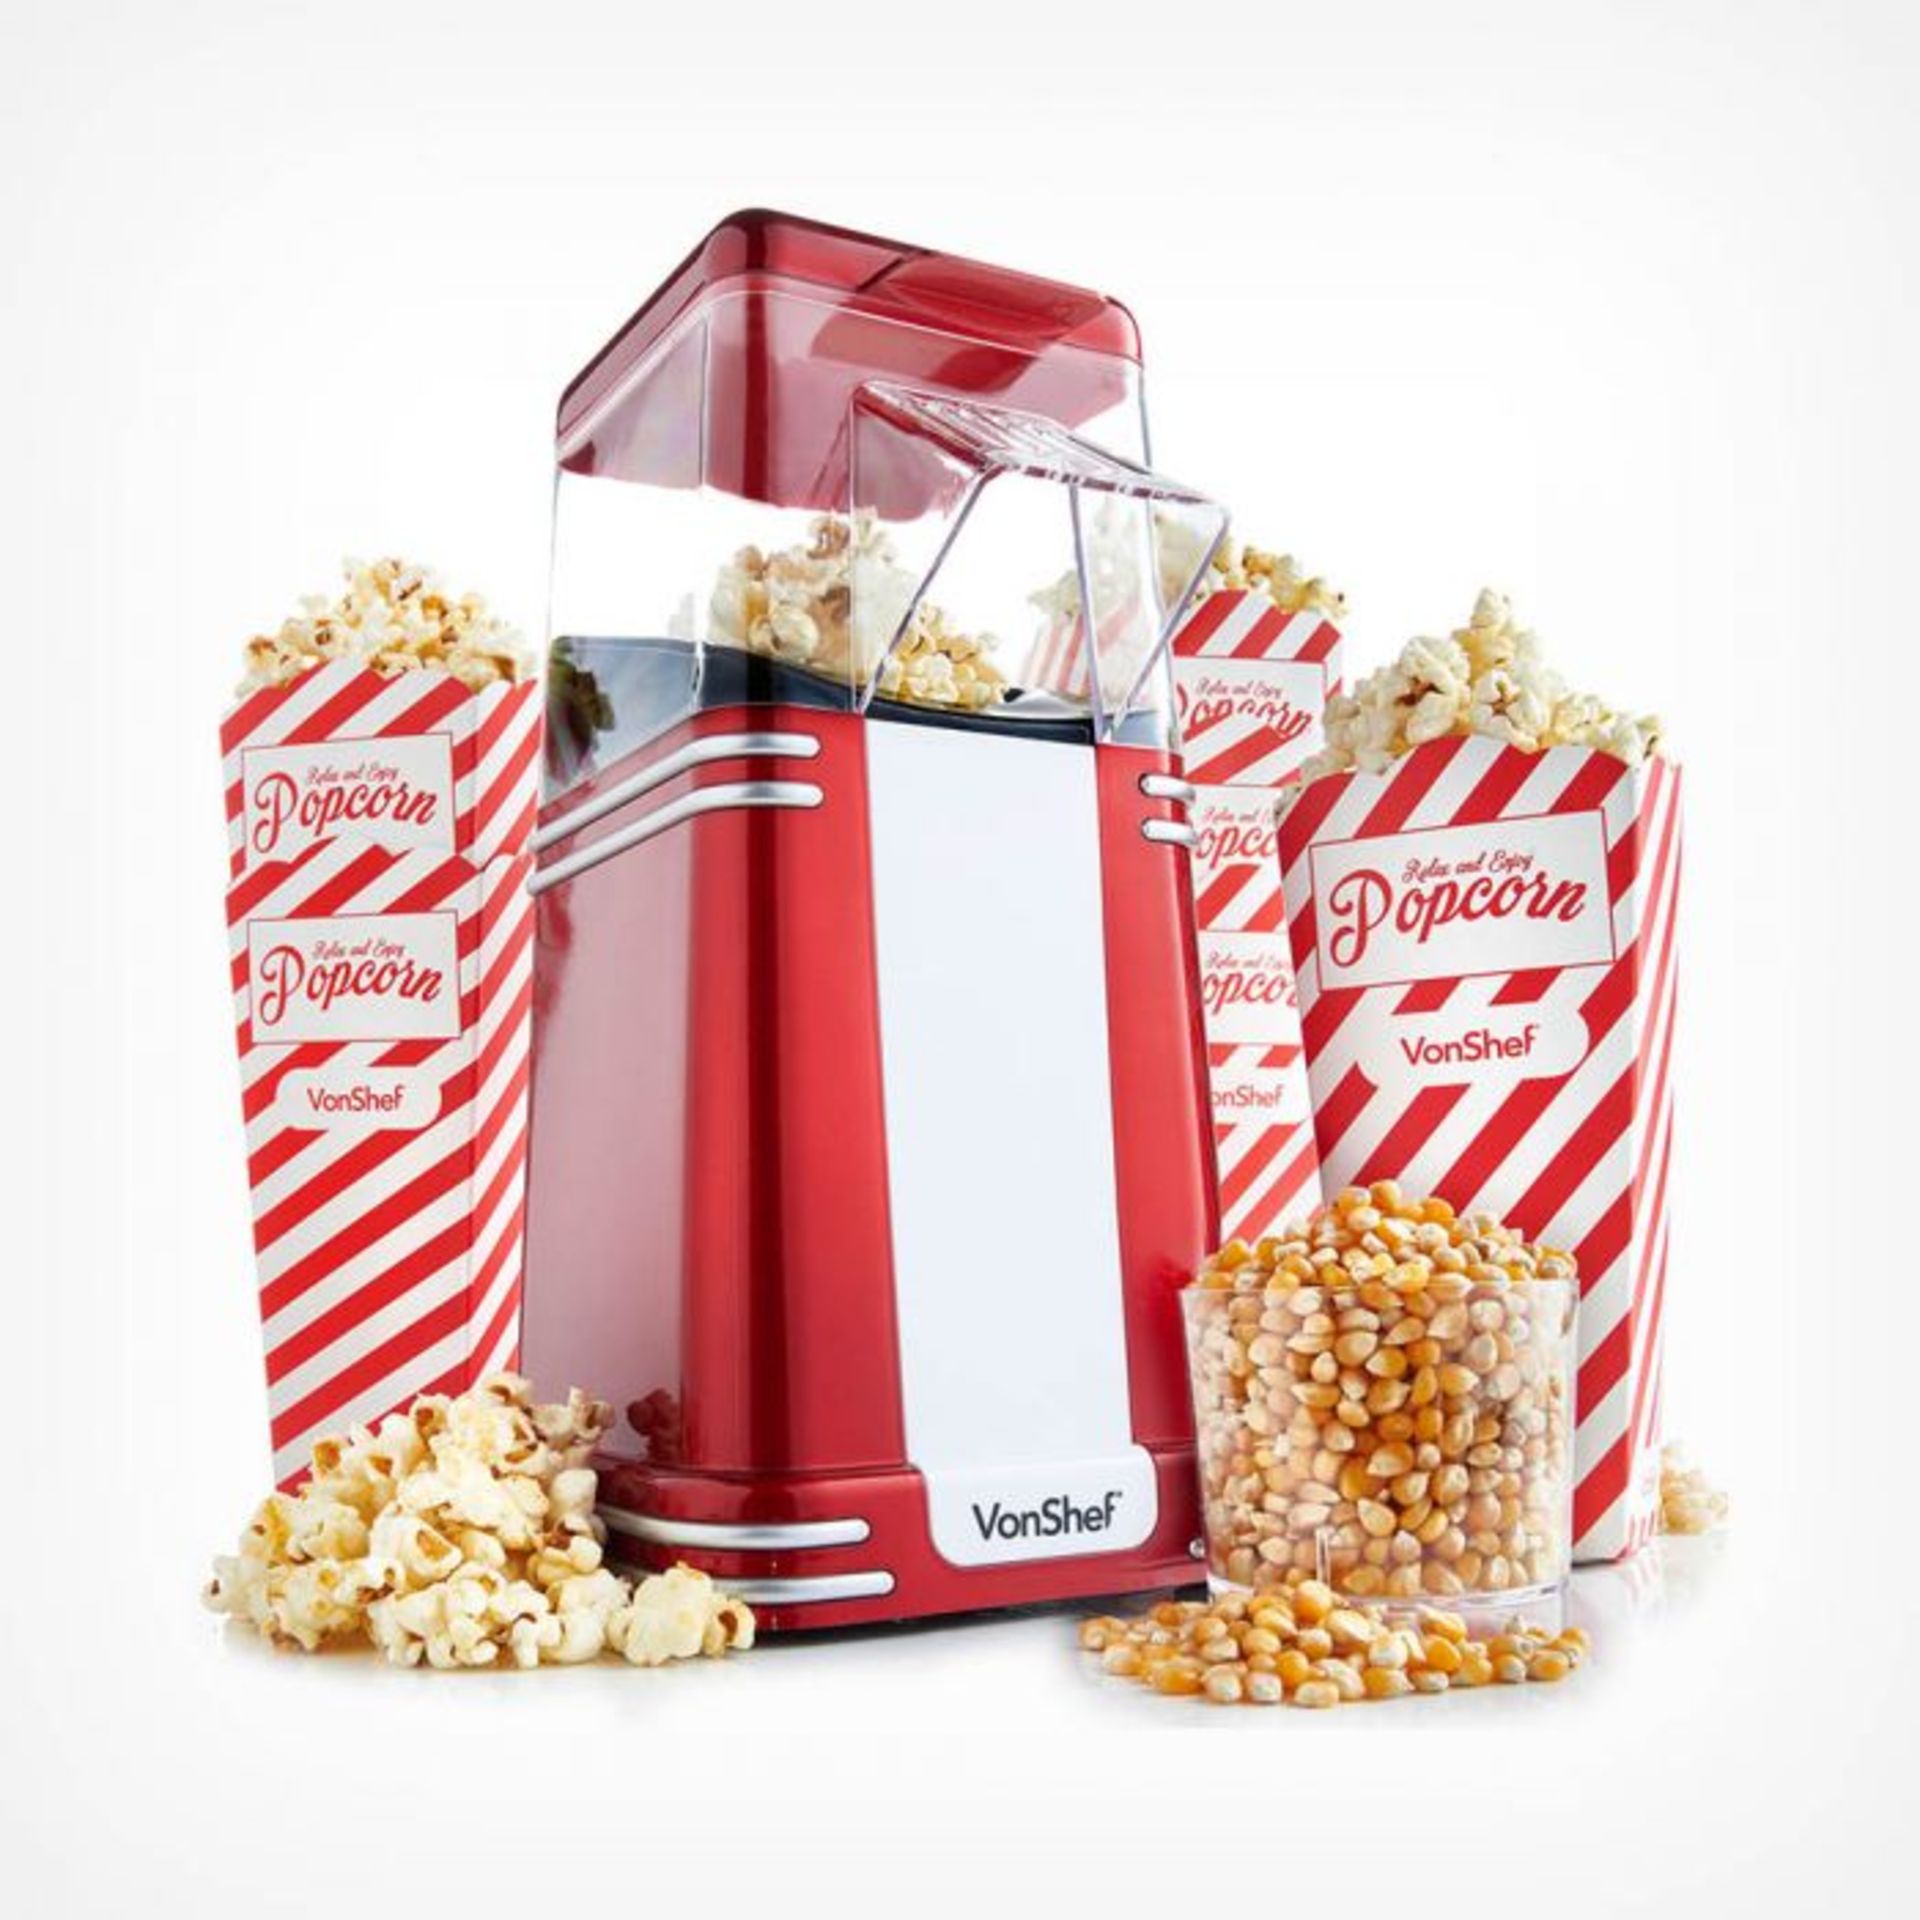 (S409) Retro Popcorn Maker Make healthy, mouth-watering popcorn the retro way! Comes with si... - Image 2 of 5